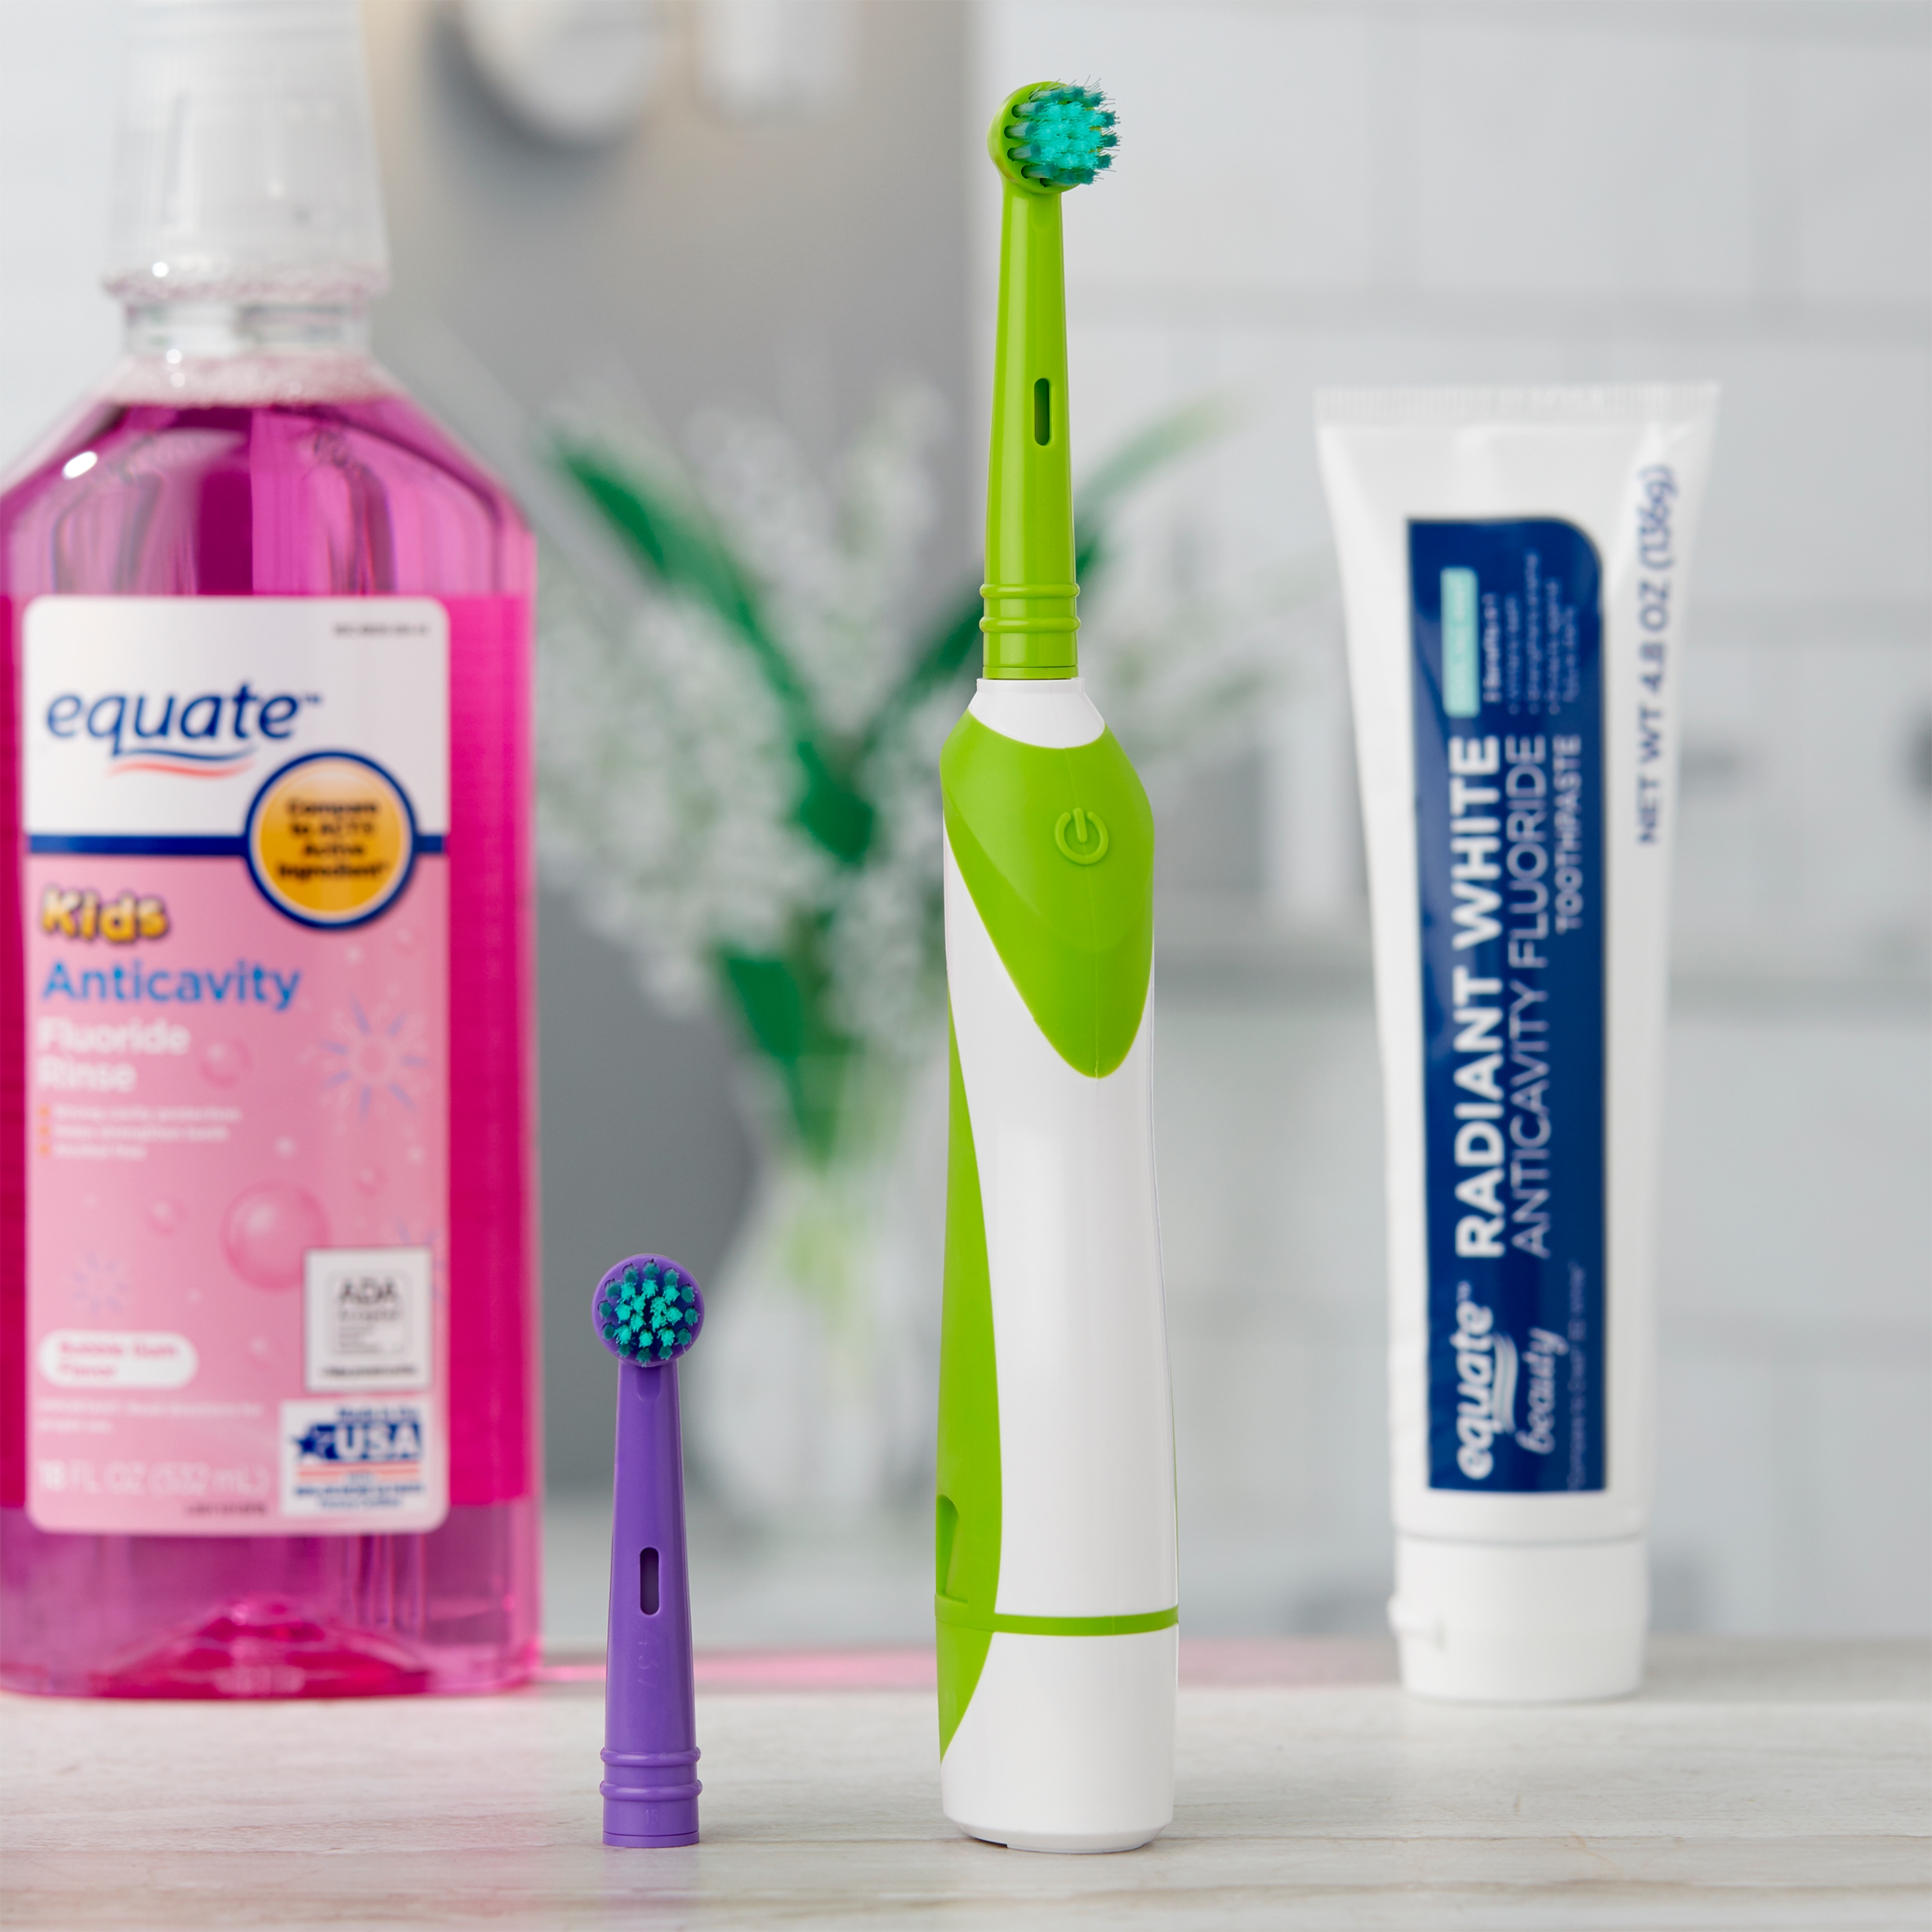 Equate Kids EasyFlex TotalPower Toothbrush with Replacement Brush Head, Battery Powered - image 2 of 12